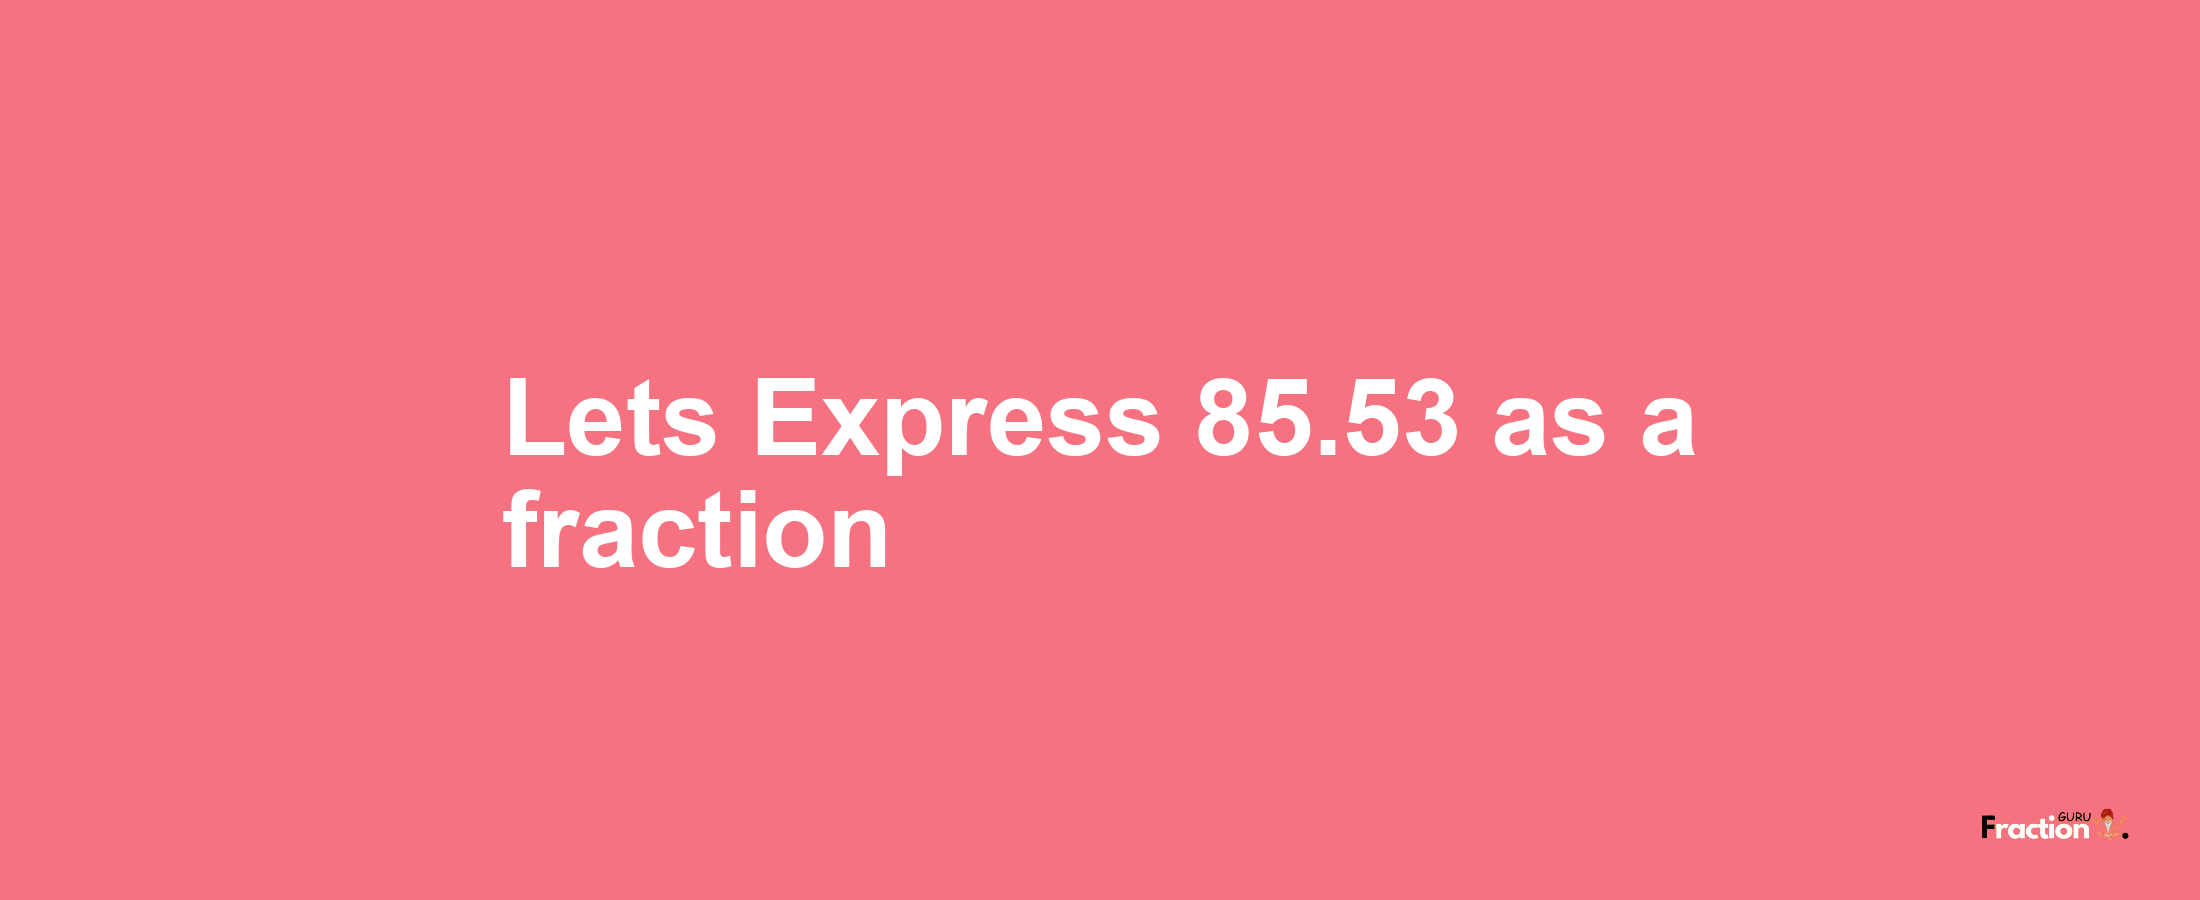 Lets Express 85.53 as afraction